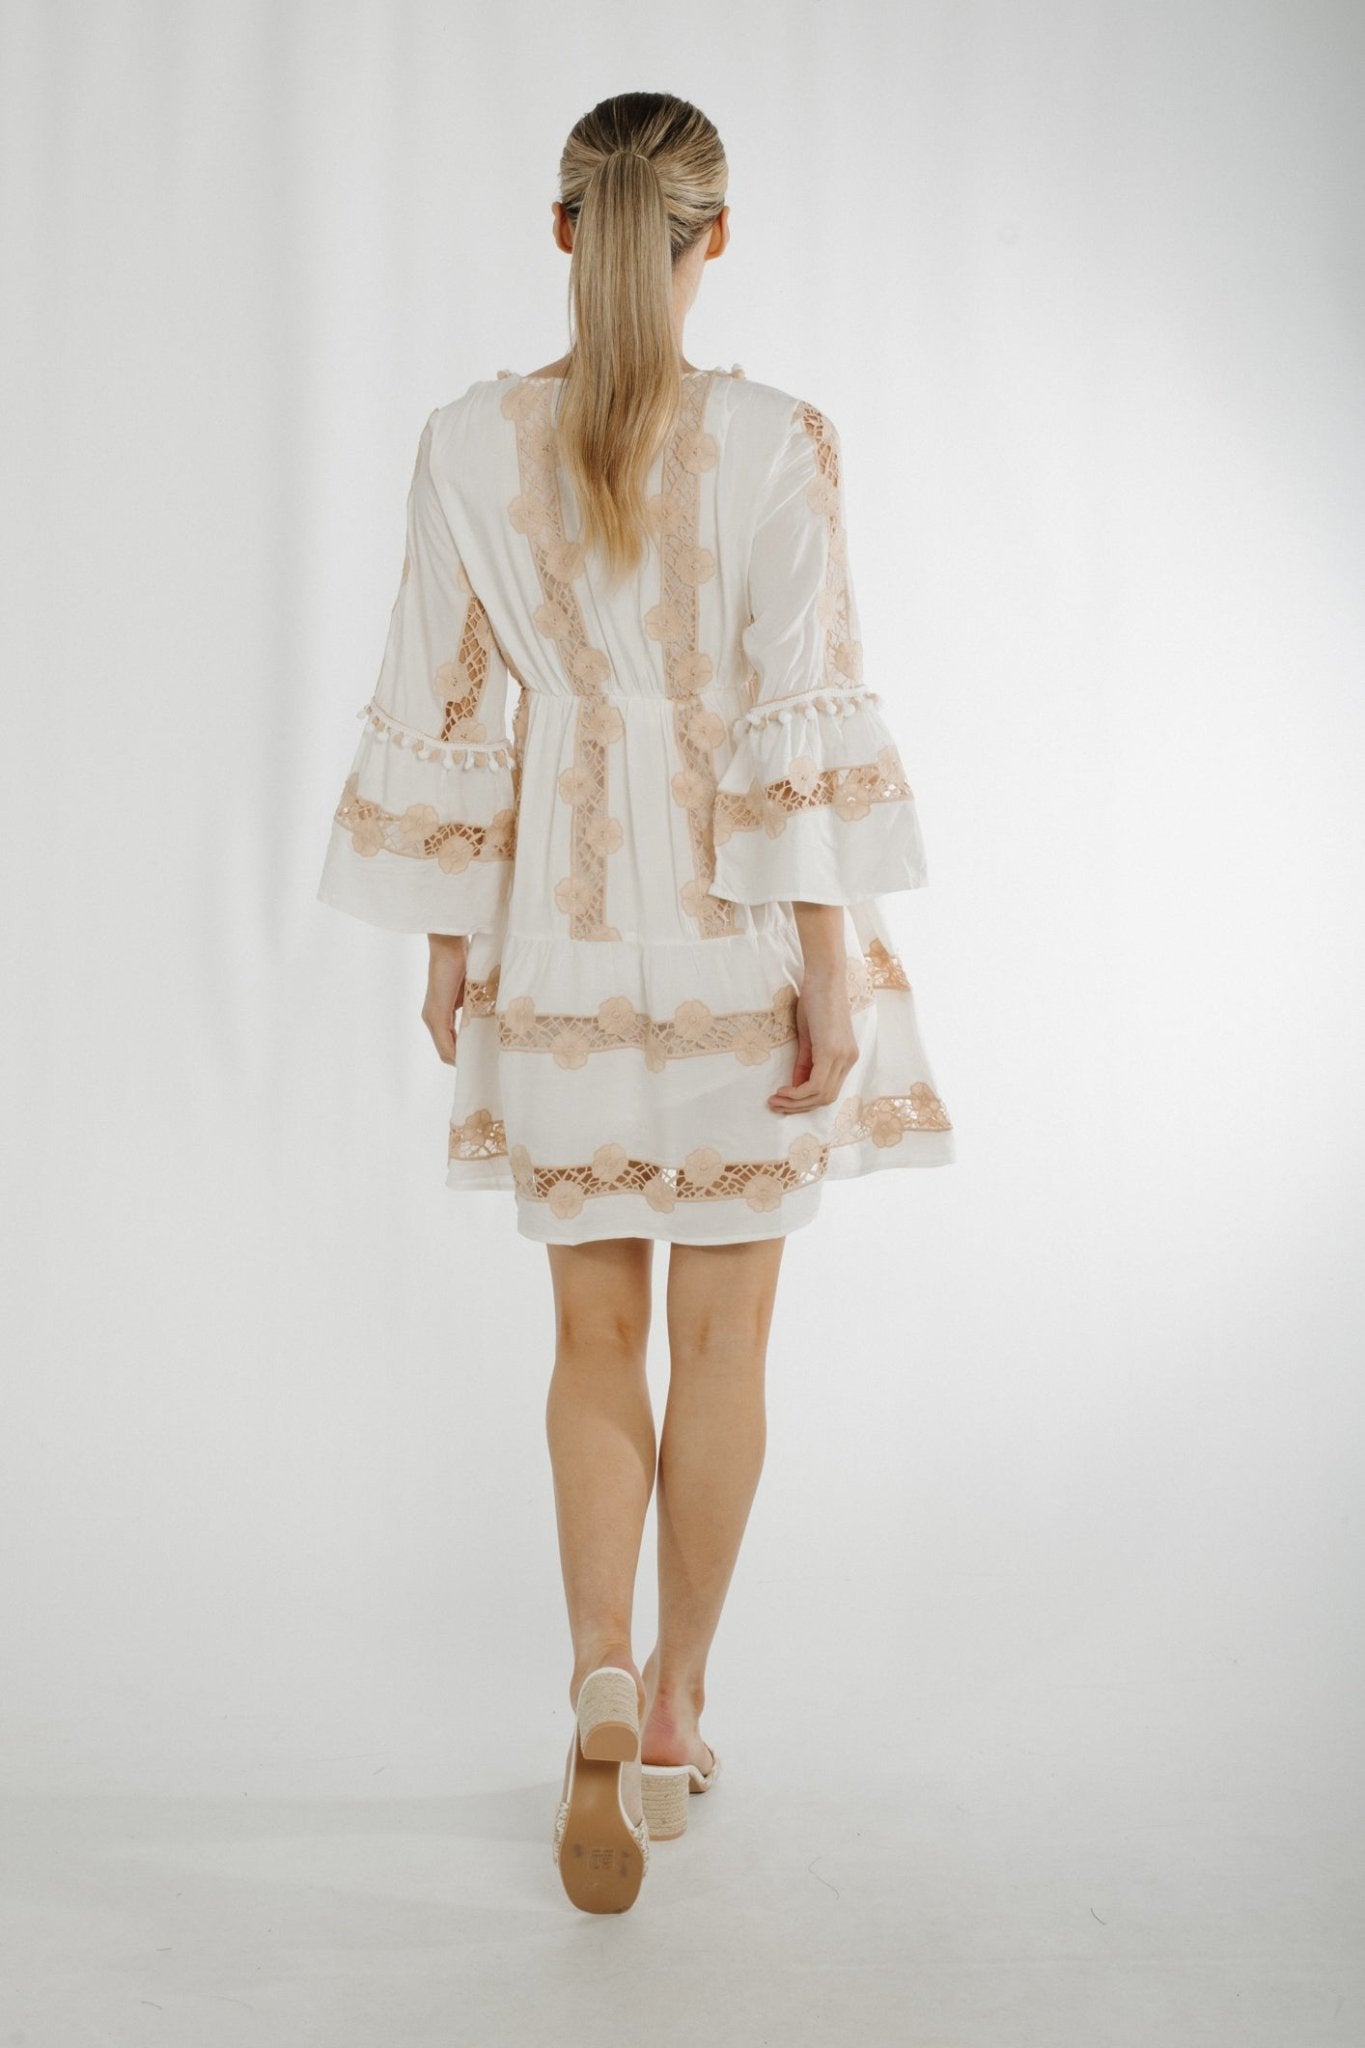 Holly Embroidered Two Tone Dress In Neutral & Cream - The Walk in Wardrobe